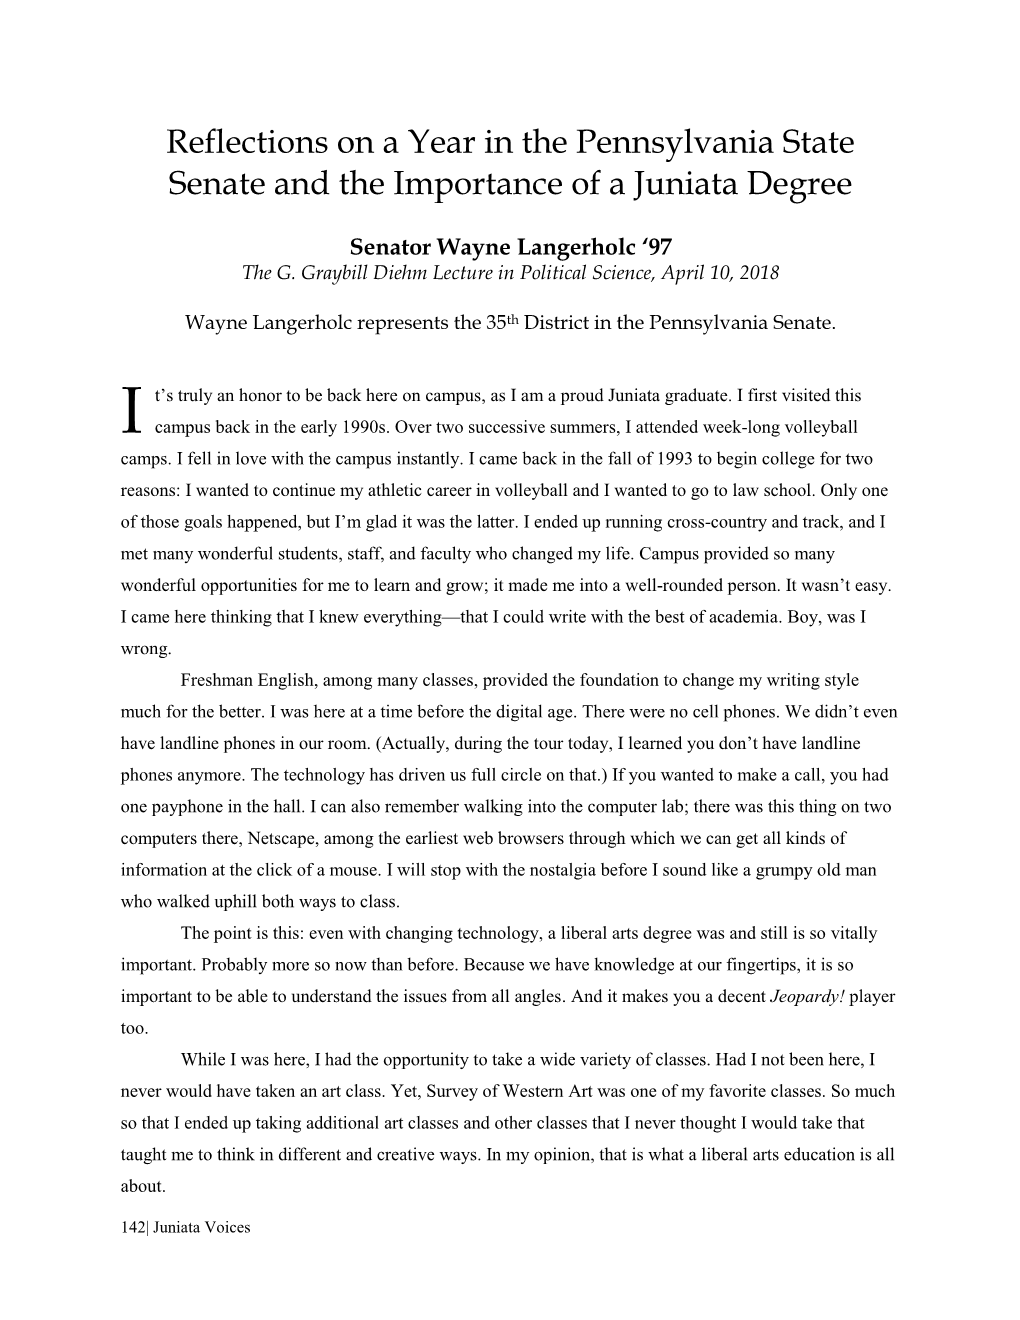 Reflections on a Year in the Pennsylvania State Senate and the Importance of a Juniata Degree